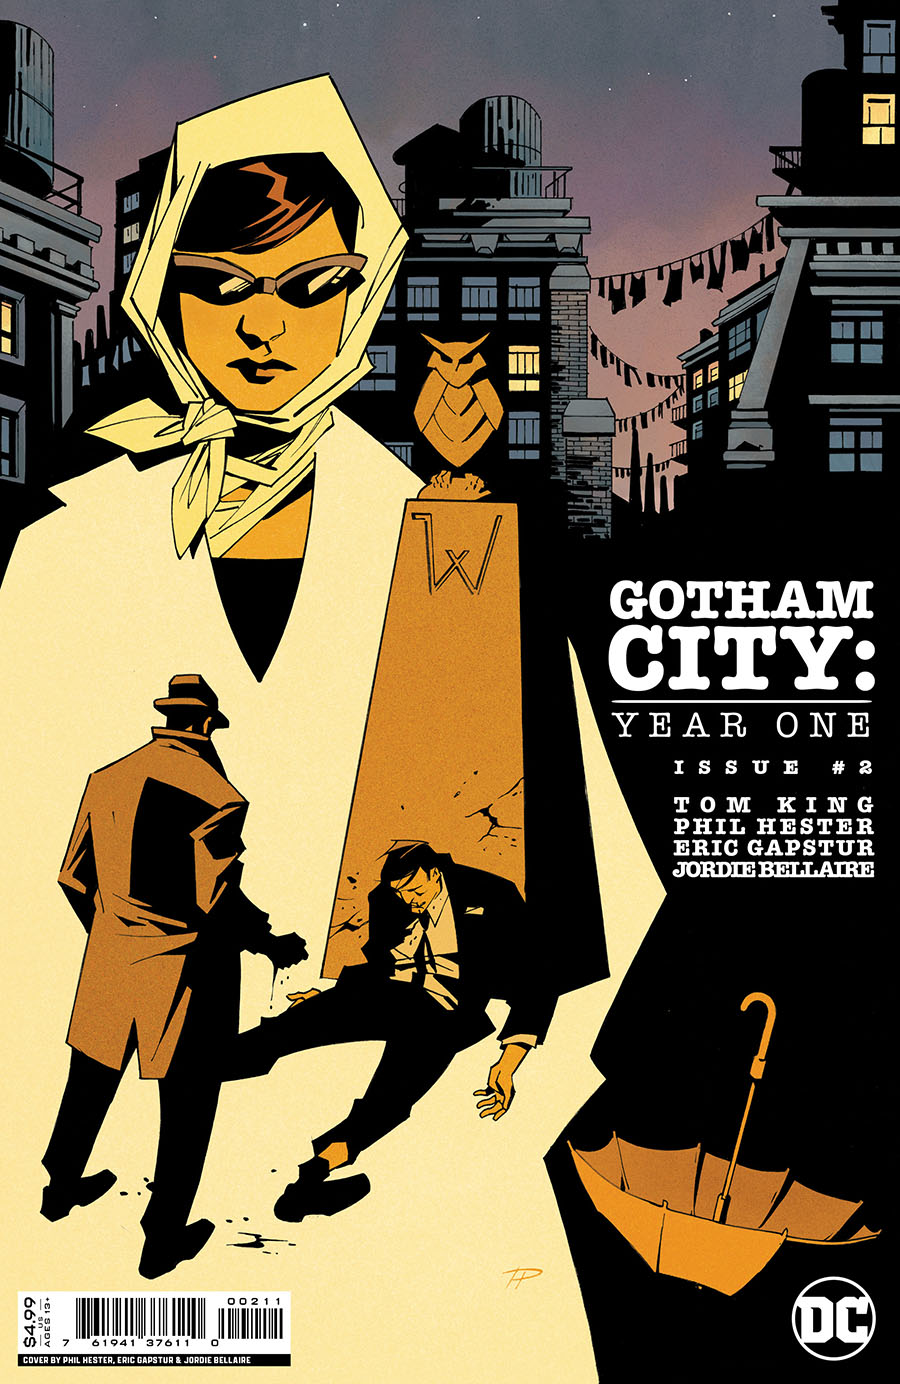 Gotham City Year One #2 Cover A Regular Phil Hester & Eric Gapstur Cover